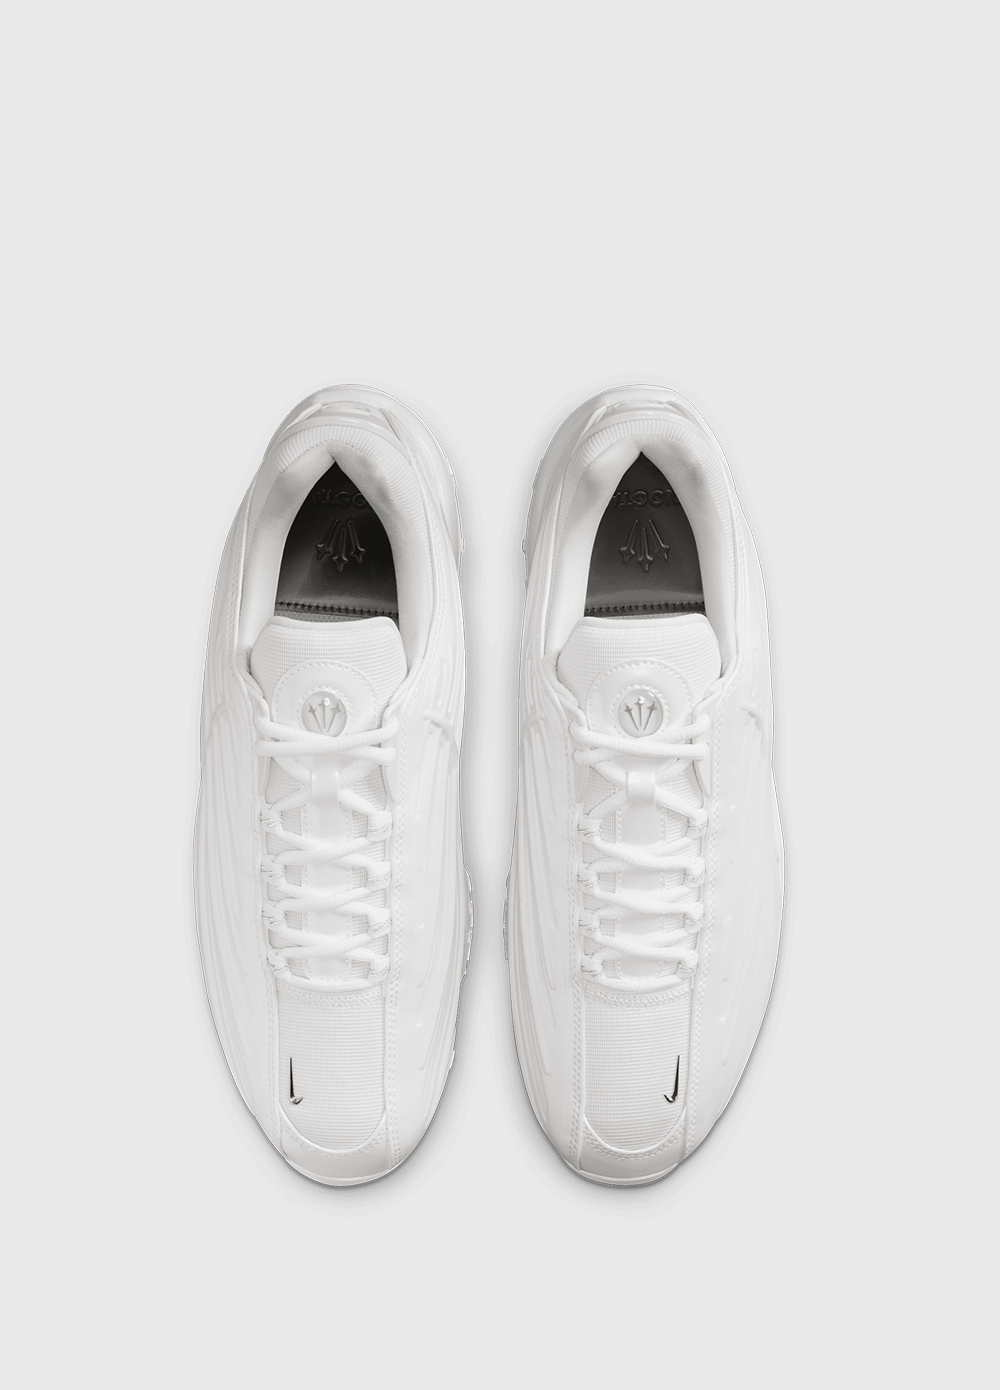 x NOCTA Hot Step 2 'White Chrome' Sneakers